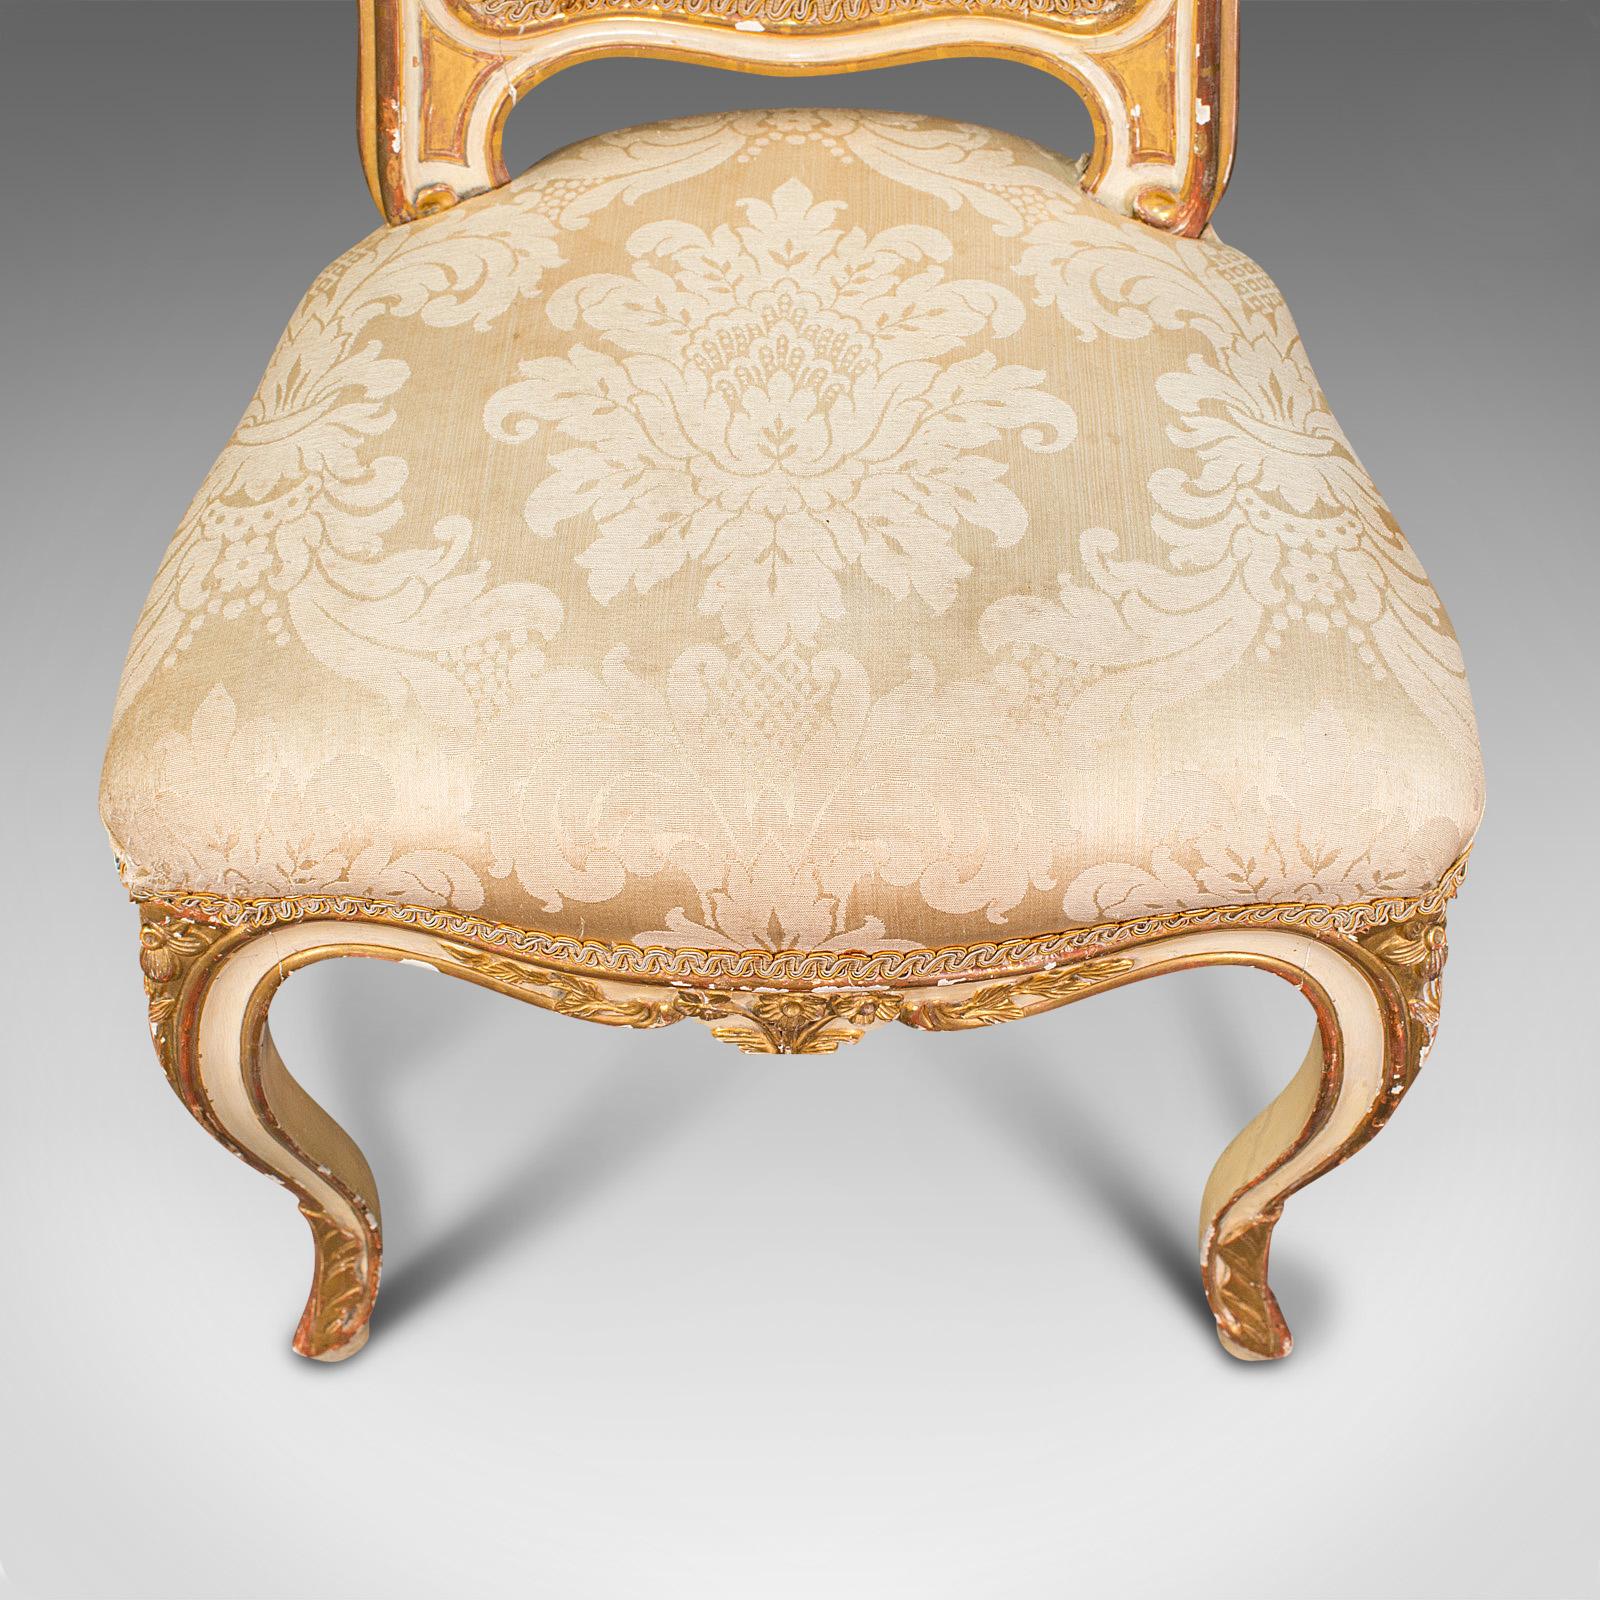 Antique Boudoir Chair, French, Giltwood, Bedroom Dressing Seat, Victorian, 1900 2